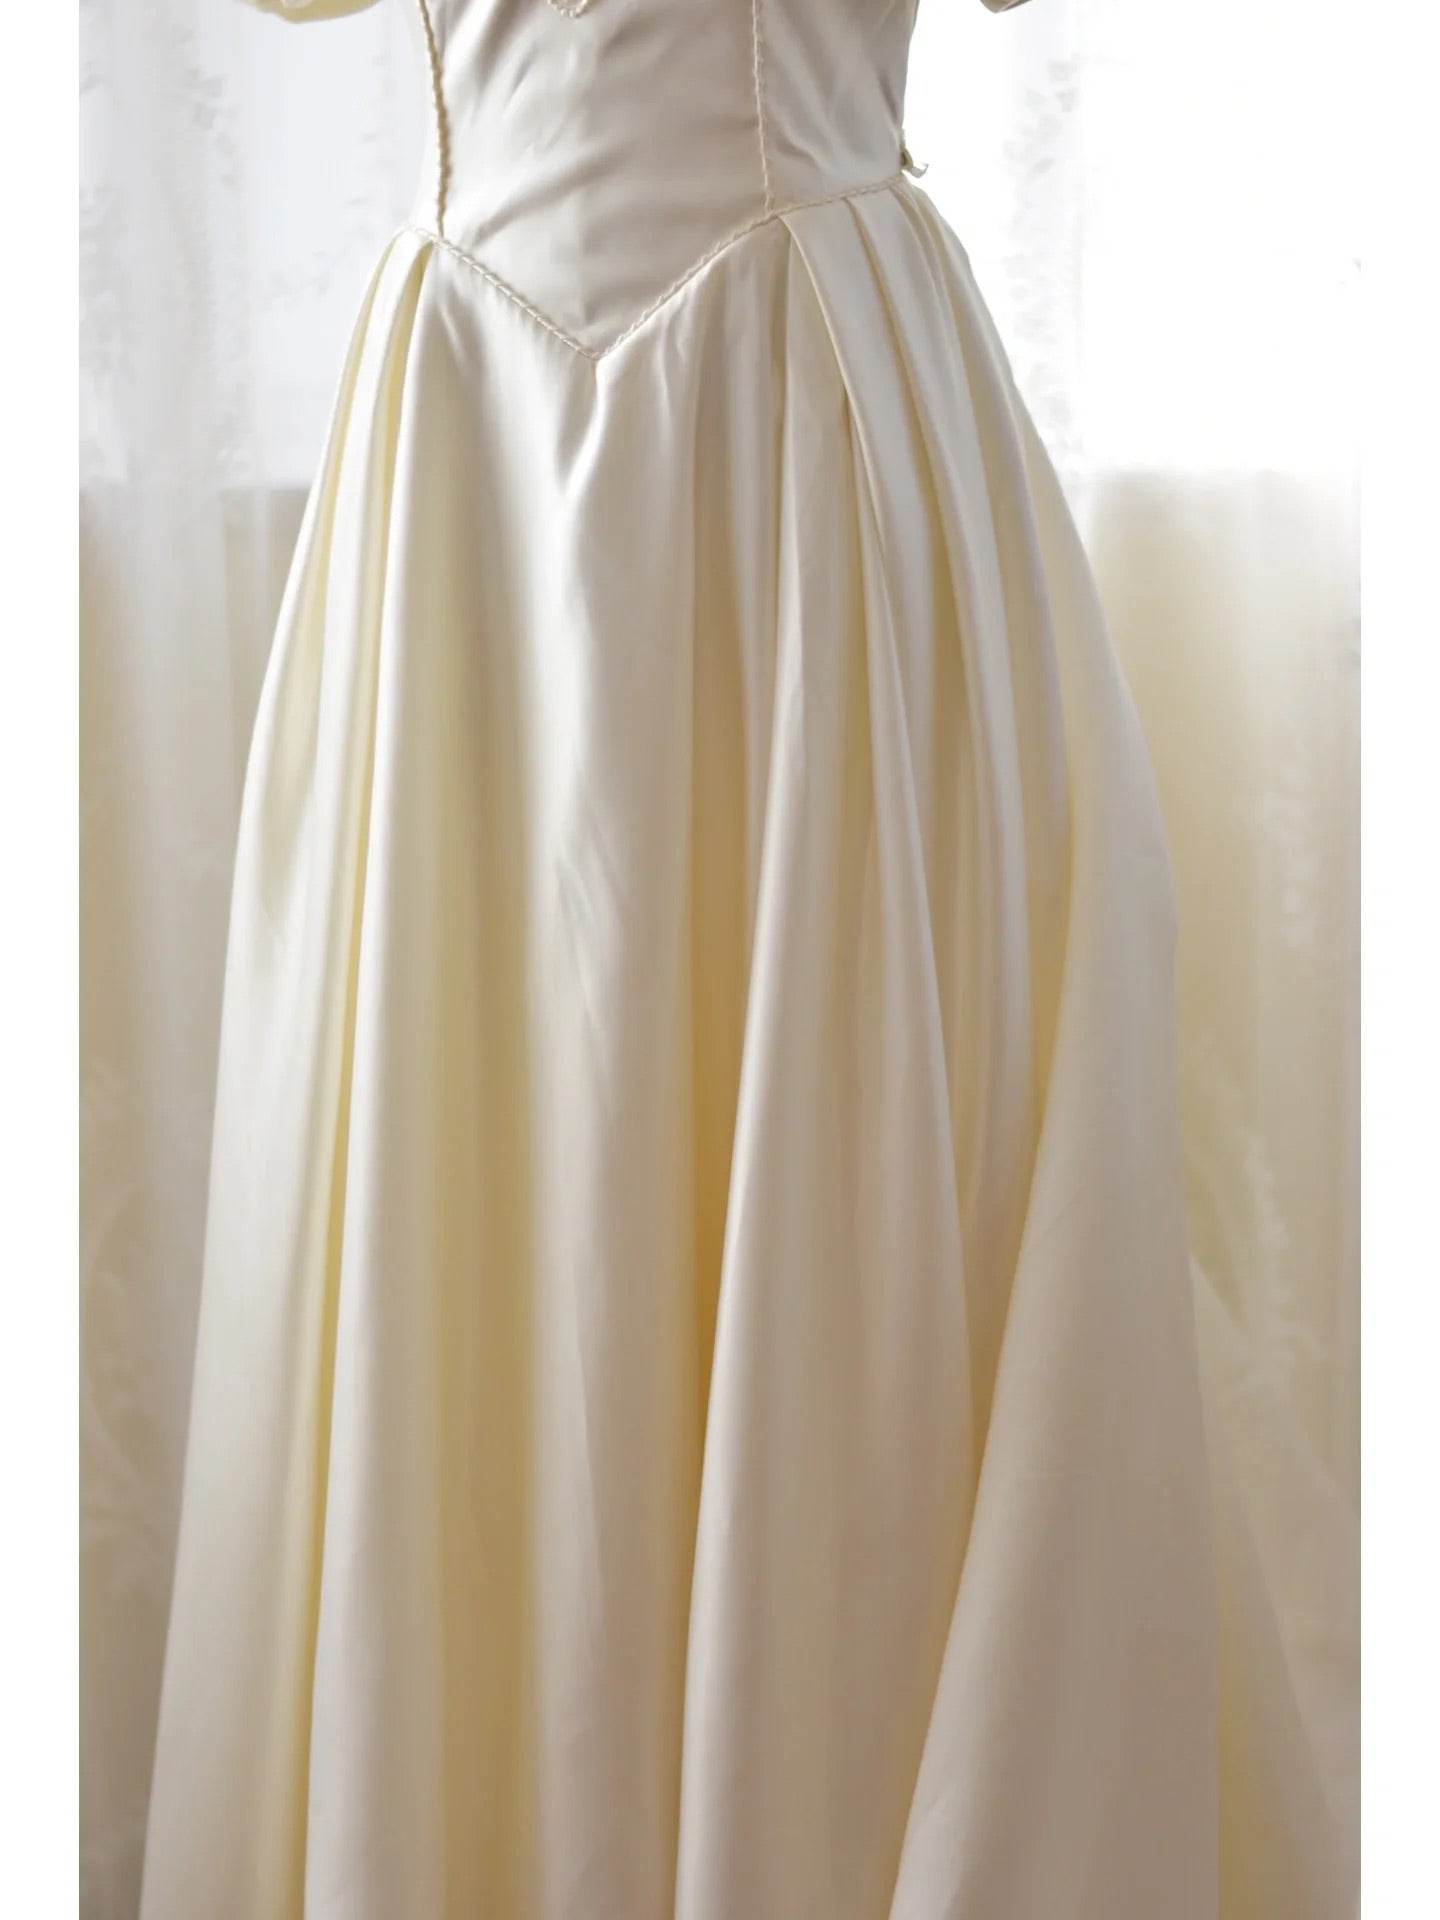 Vintage Satin 80s Wedding Dress with Flattering Puffy Sleeves - DollyGown